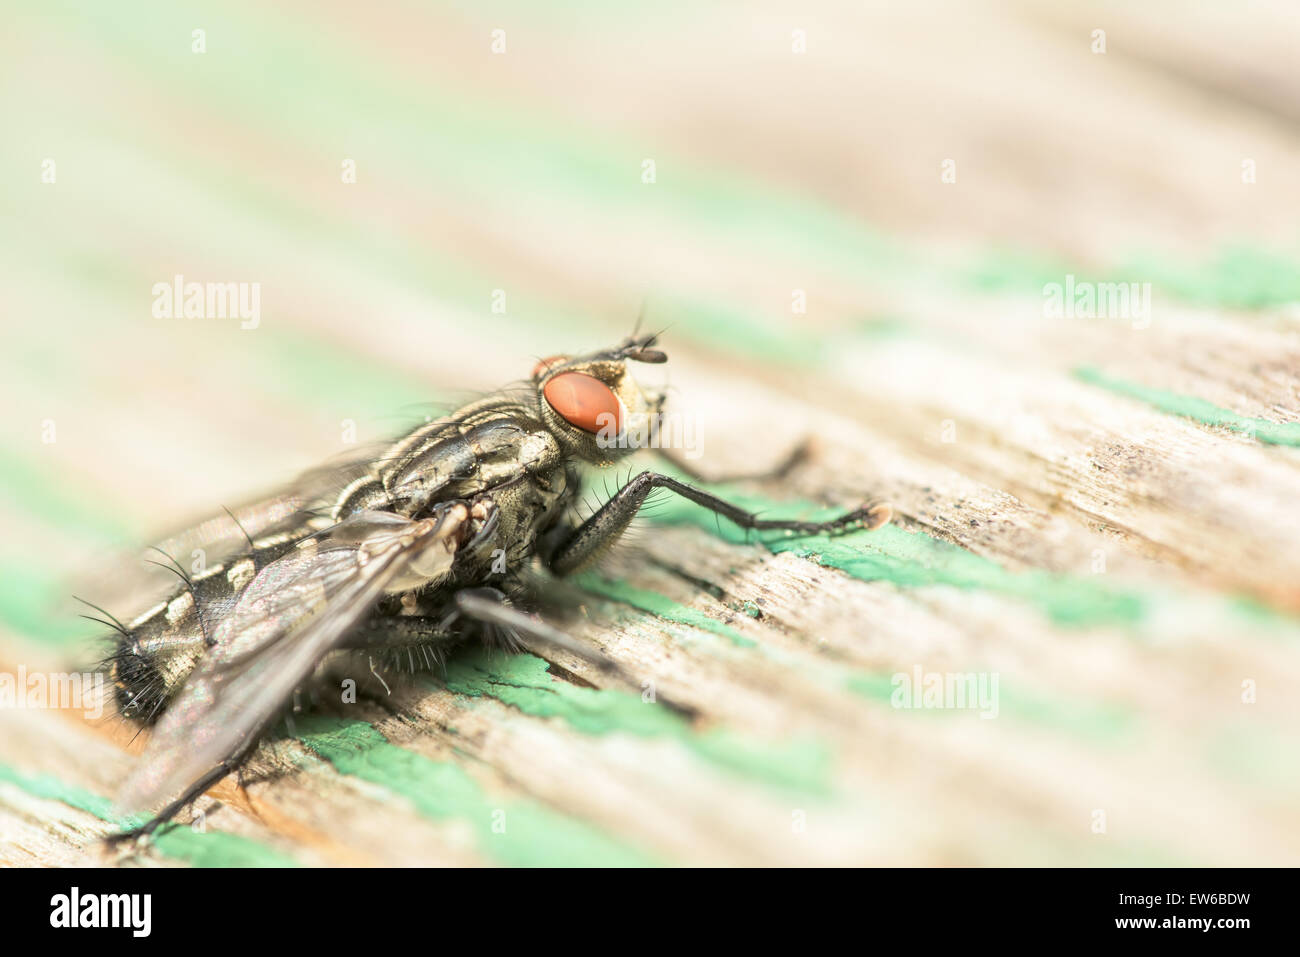 Common House Fly (Musca Domestica) Macro On Green Wood Stock Photo